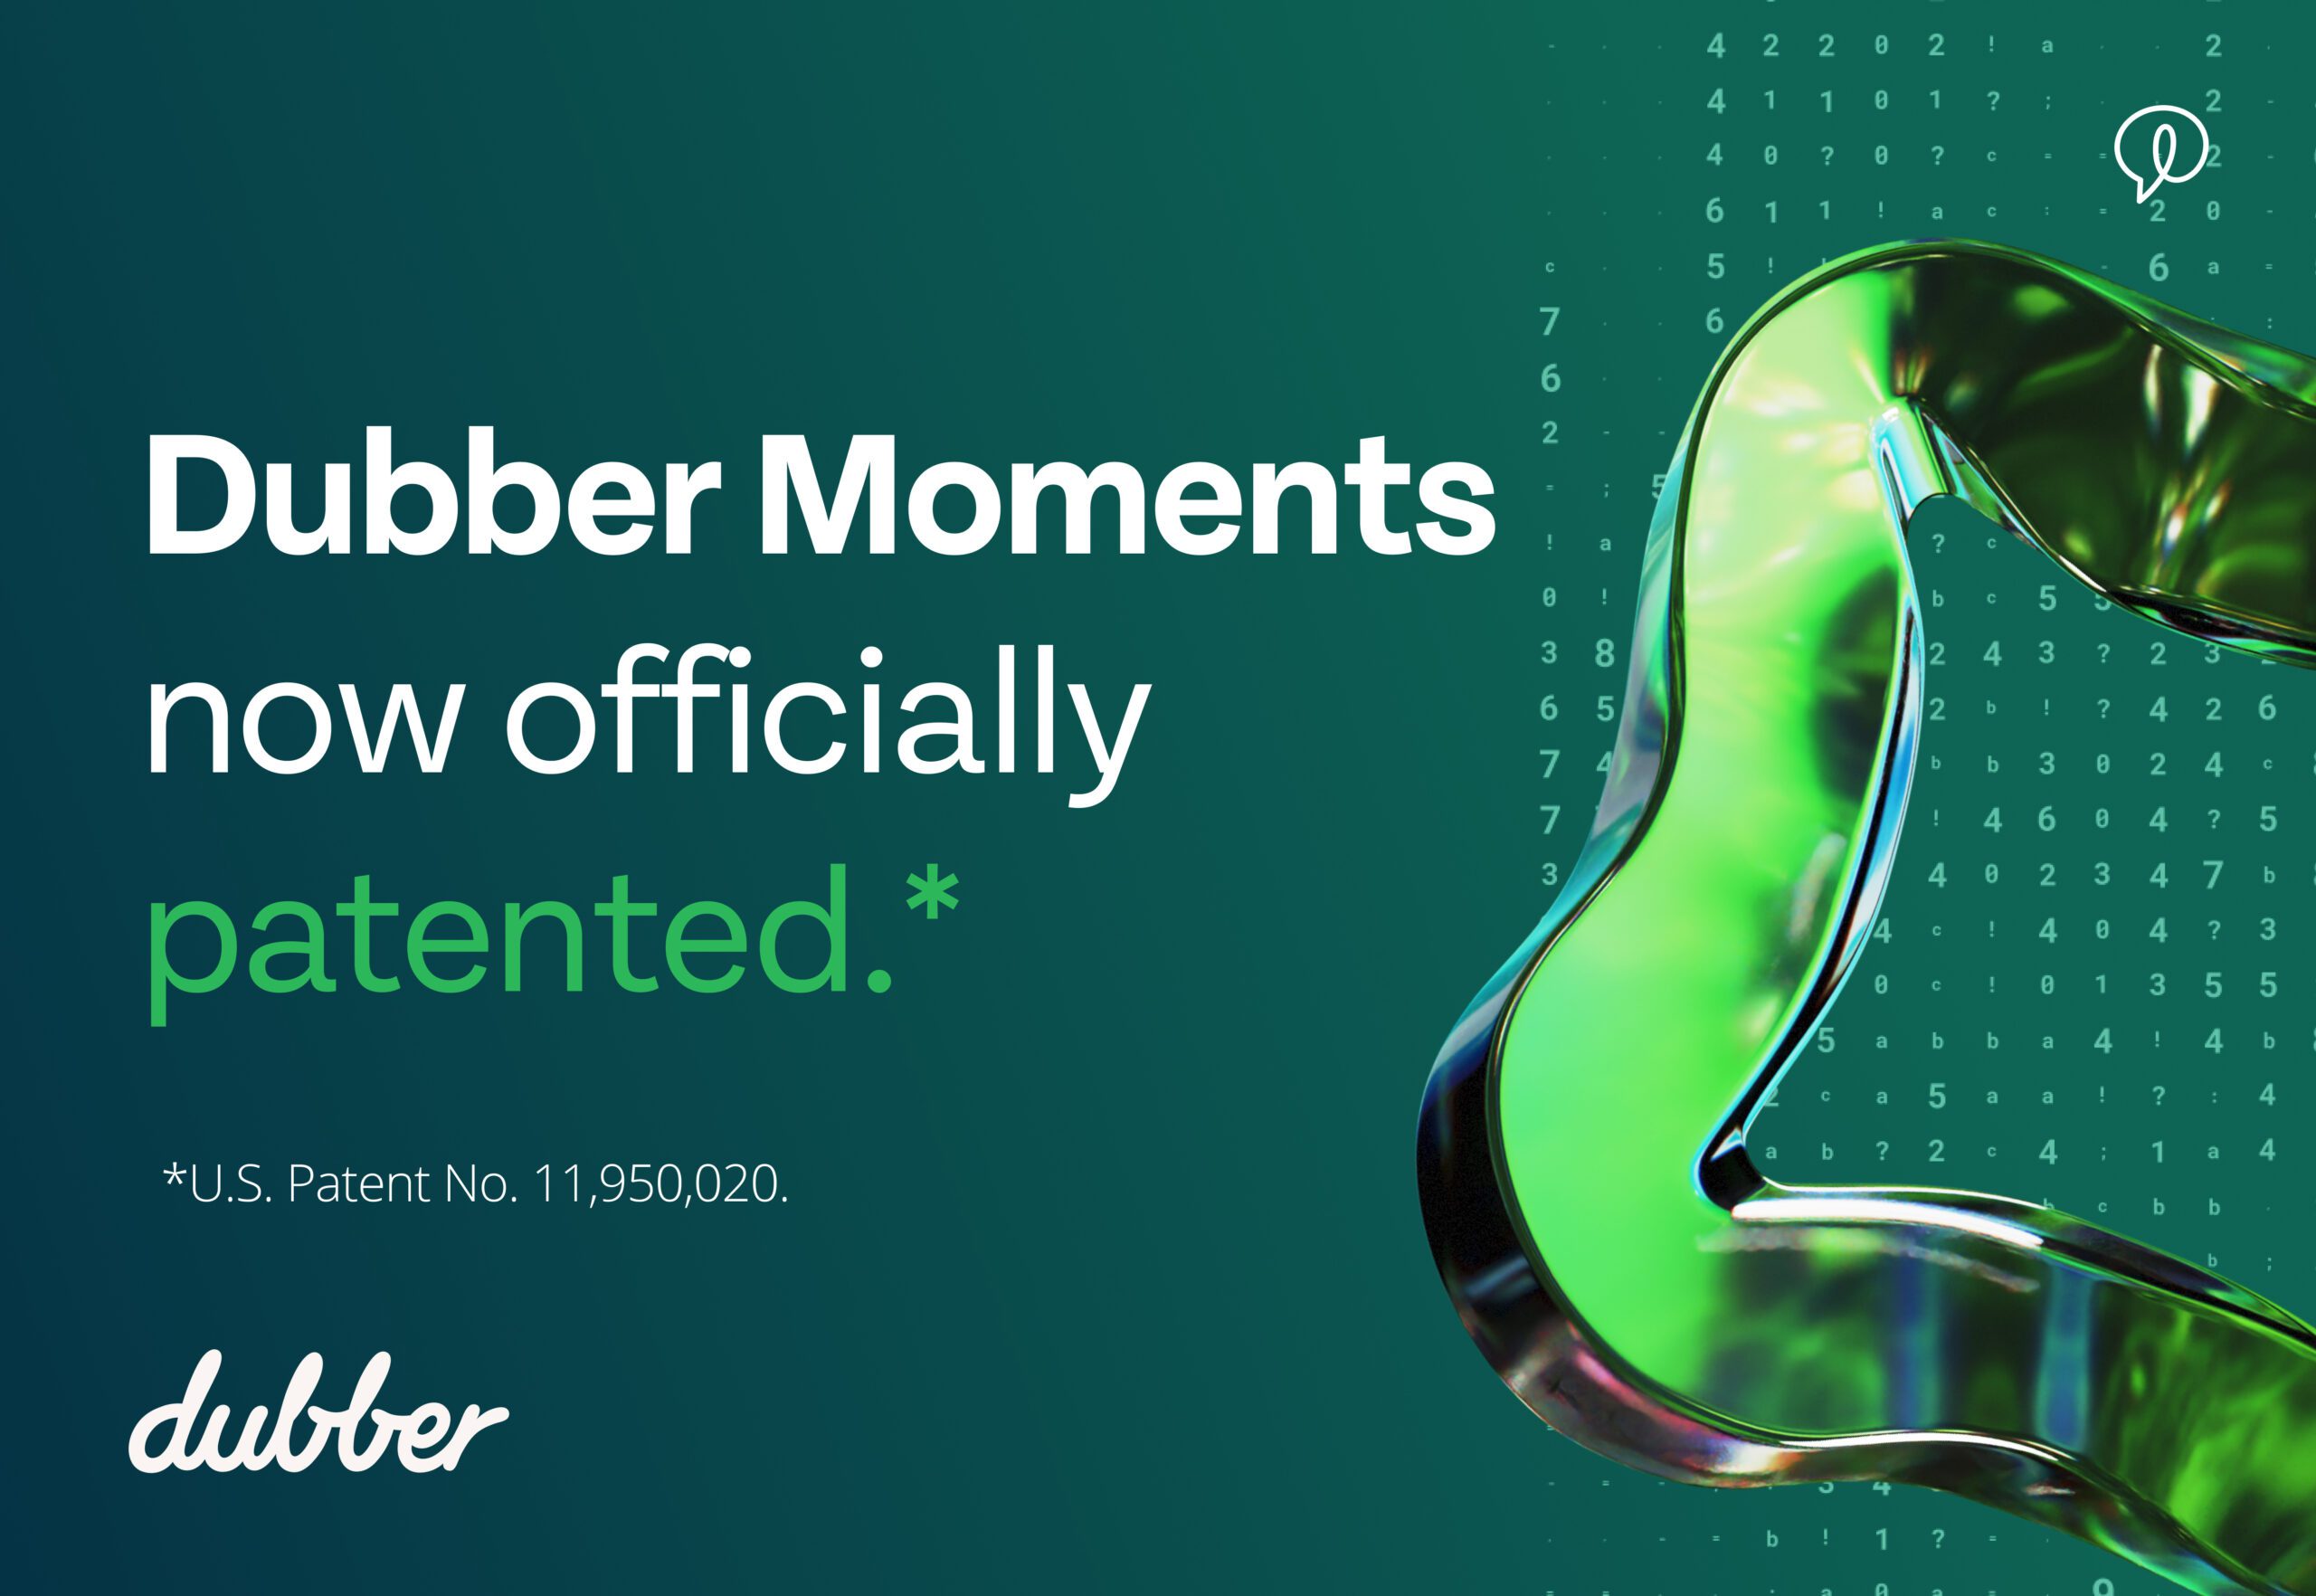 Dubber Moments is now officially patented!